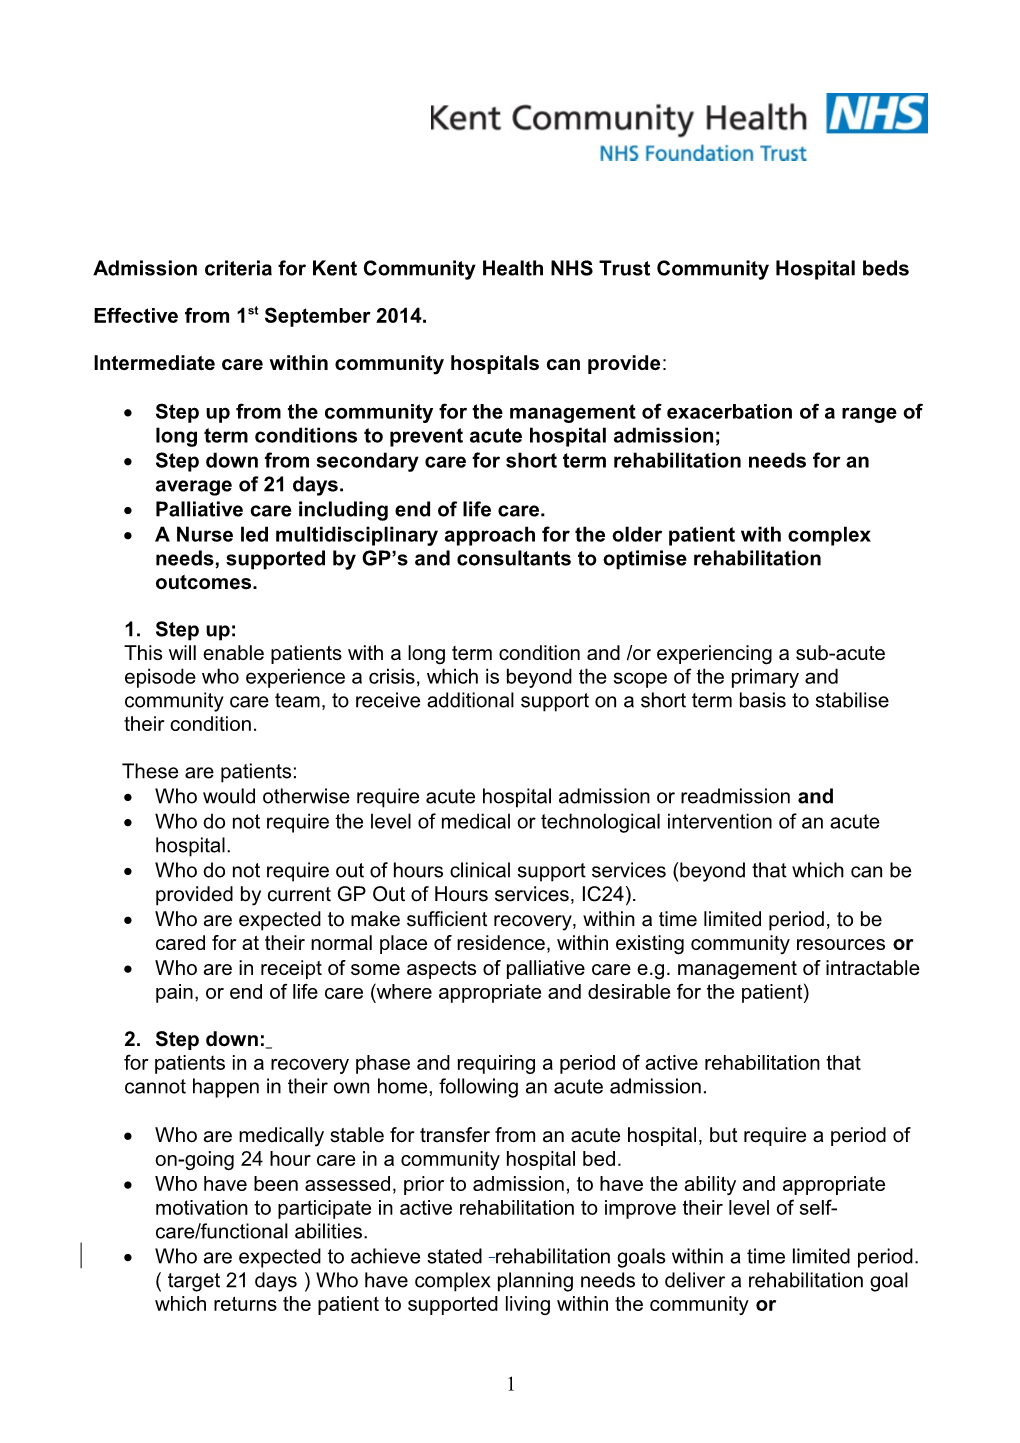 Discussion Document for DVH Urgent Care Board